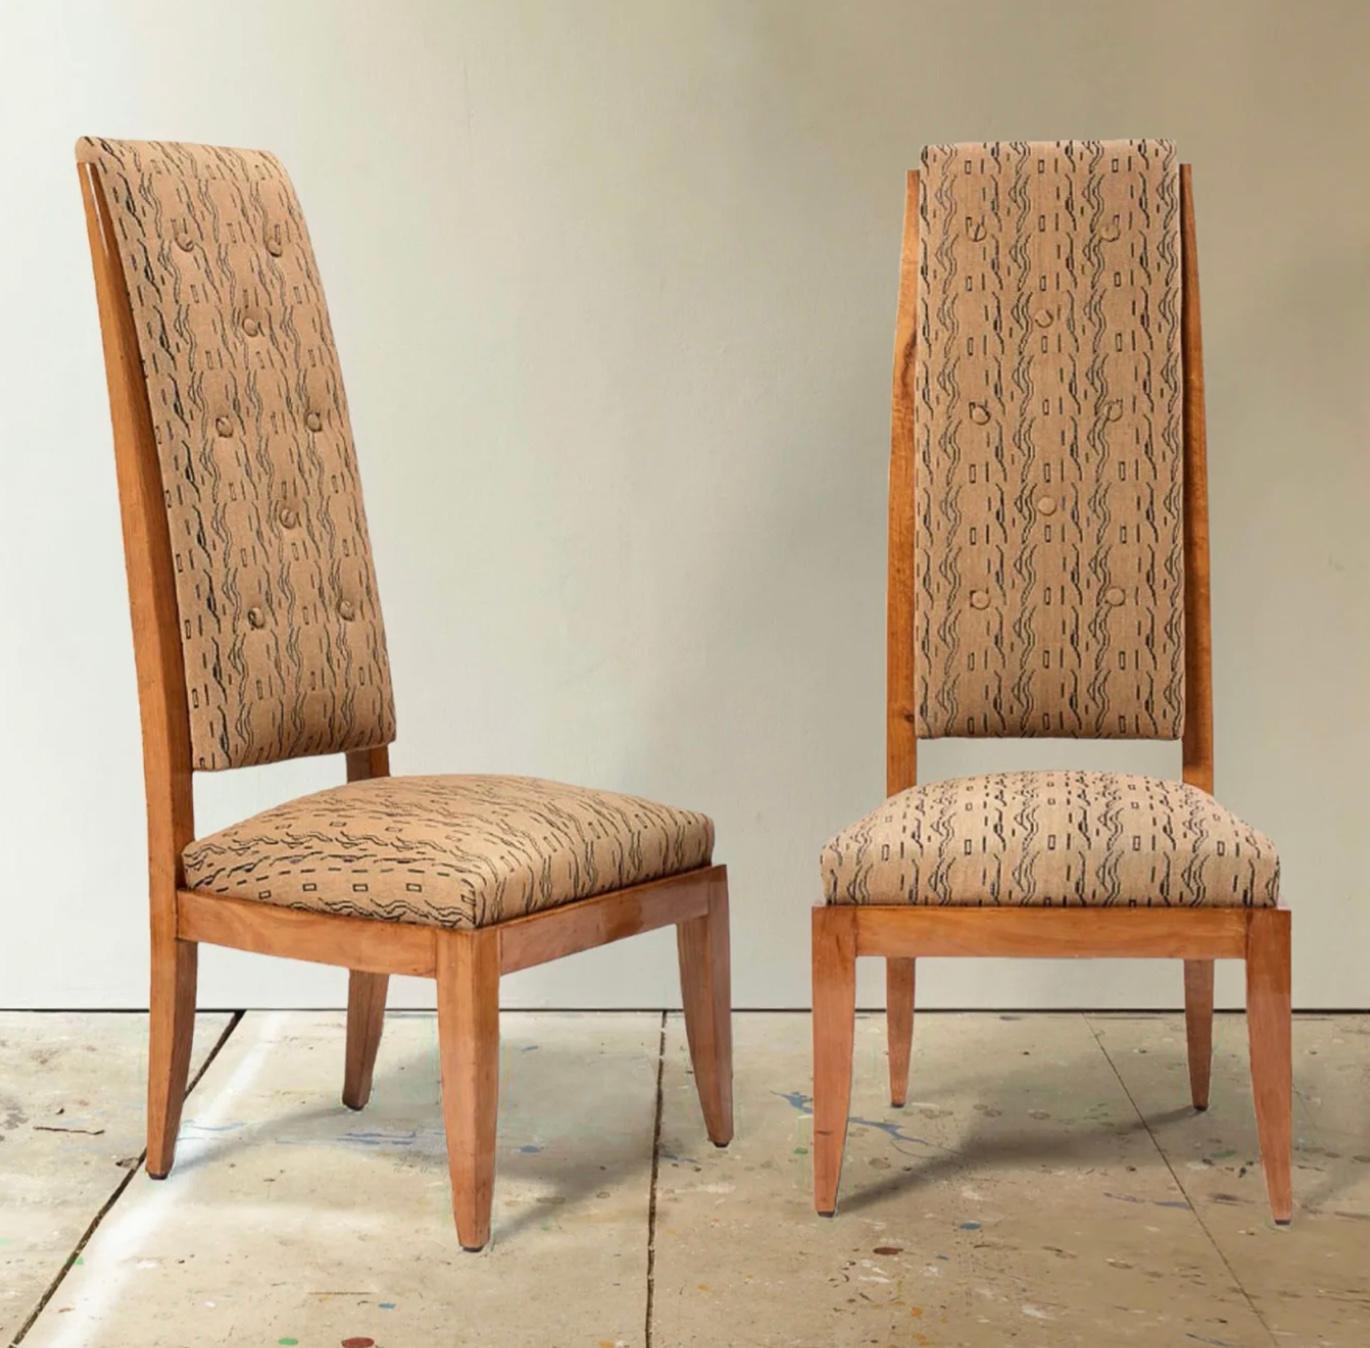 An elegant pair of blond mahogany fireside chairs in original fabric by Dominique, Paris 1940s
With original upholstery. In excellent condition.

Measures: H108 x 46 x 52cm.